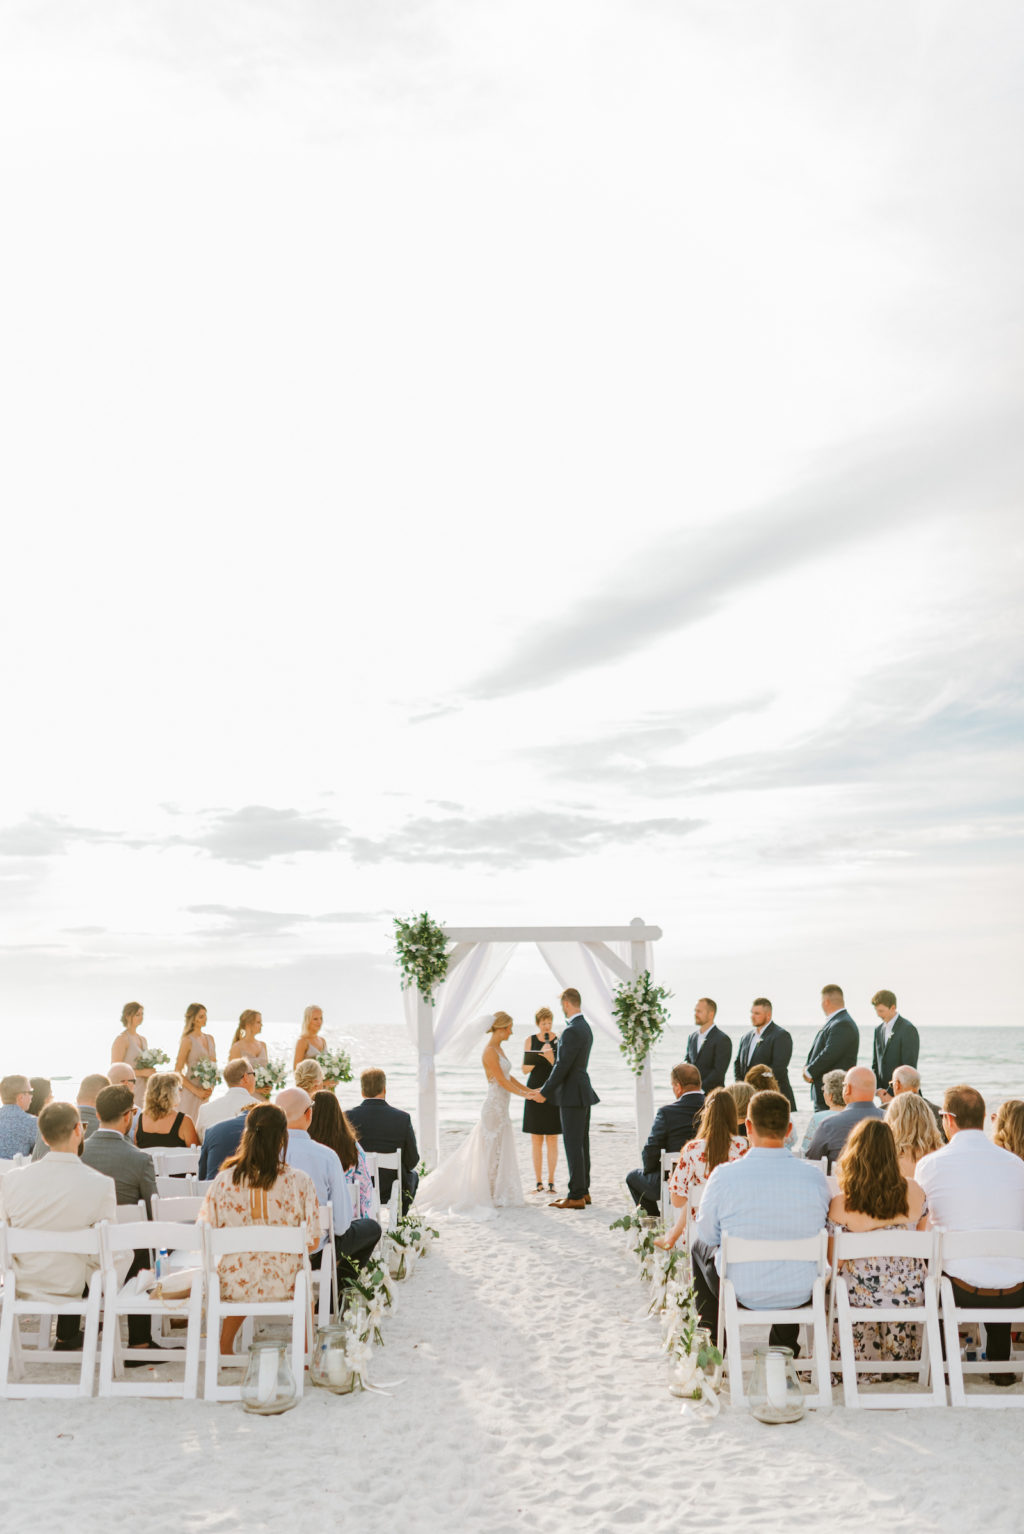 Florida Bride and Groom Exchanging Wedding Vows on Beach | Tampa Wedding Venue The Resort at Longboat Key Club | A Wedding with Grace